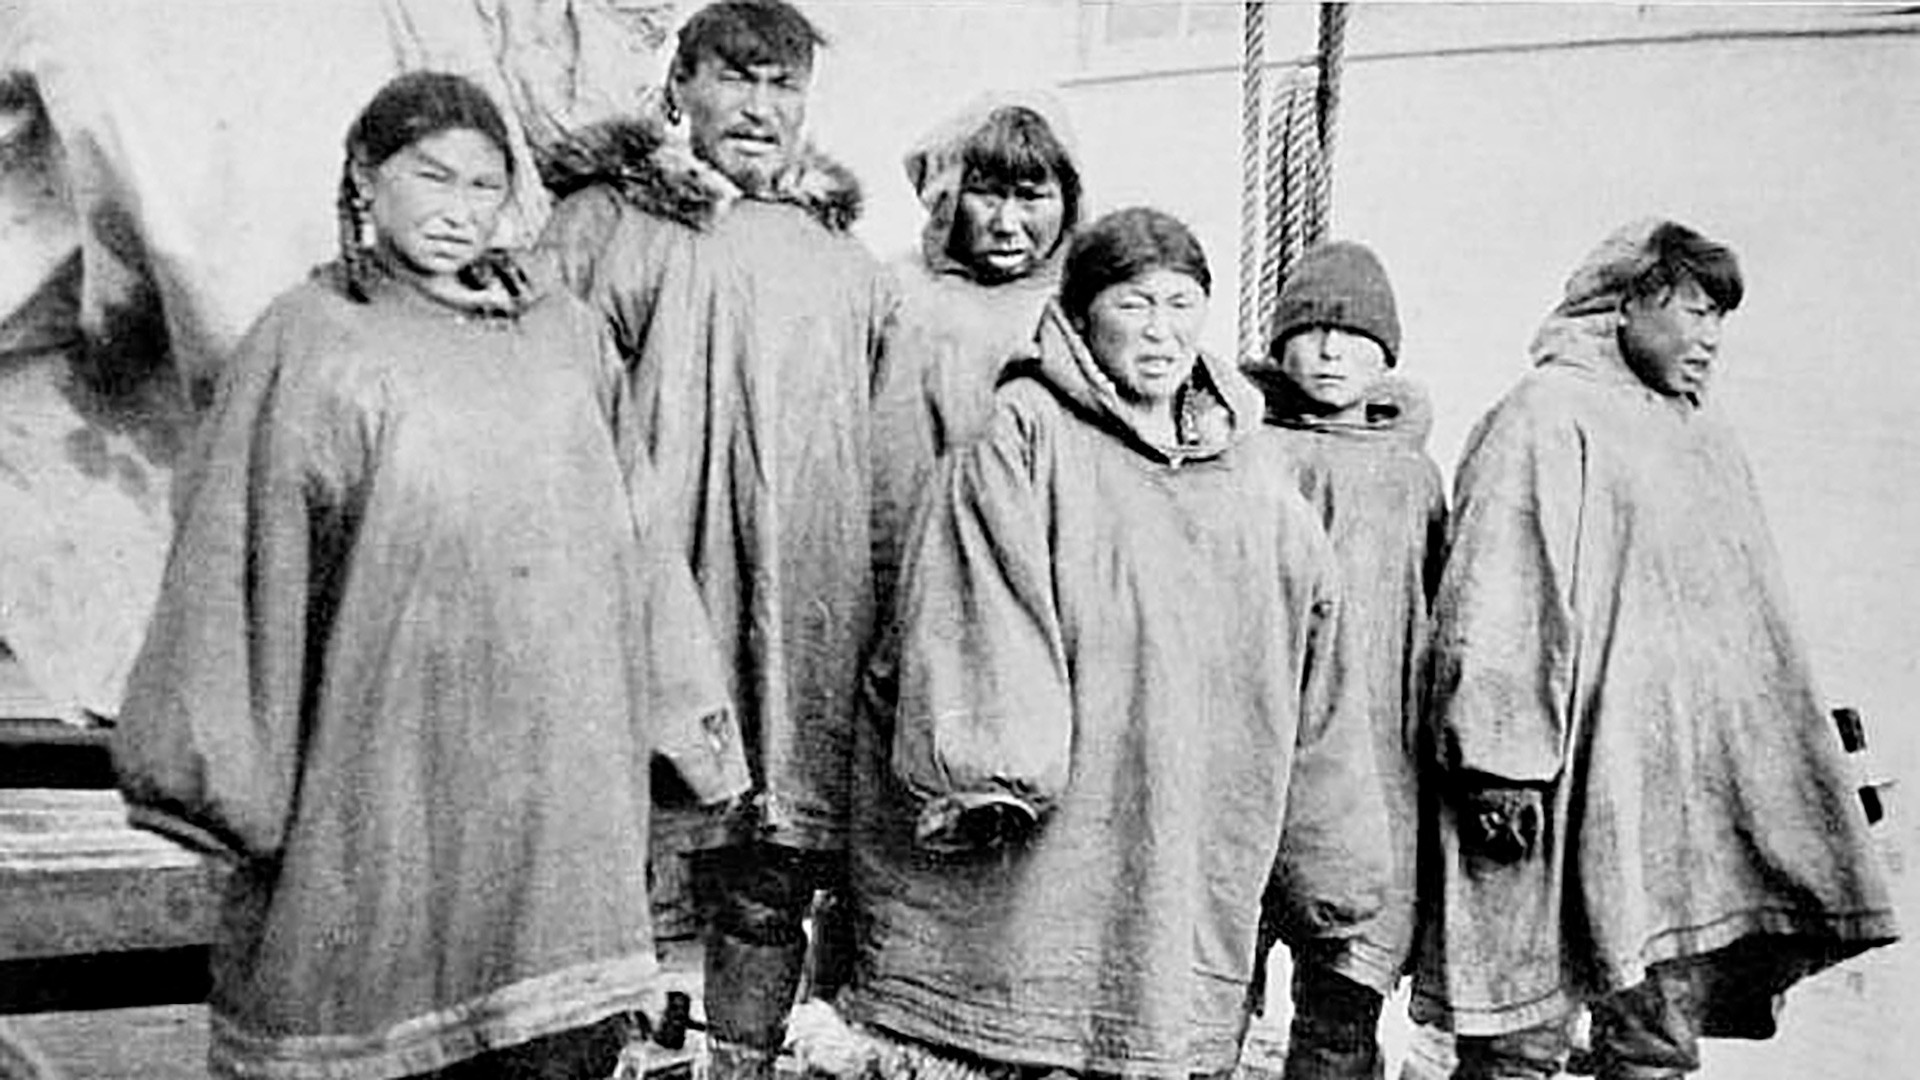 Chukchi residents of a remote Uelen village (1913). By that time the Chukchi reached peace with Russia.